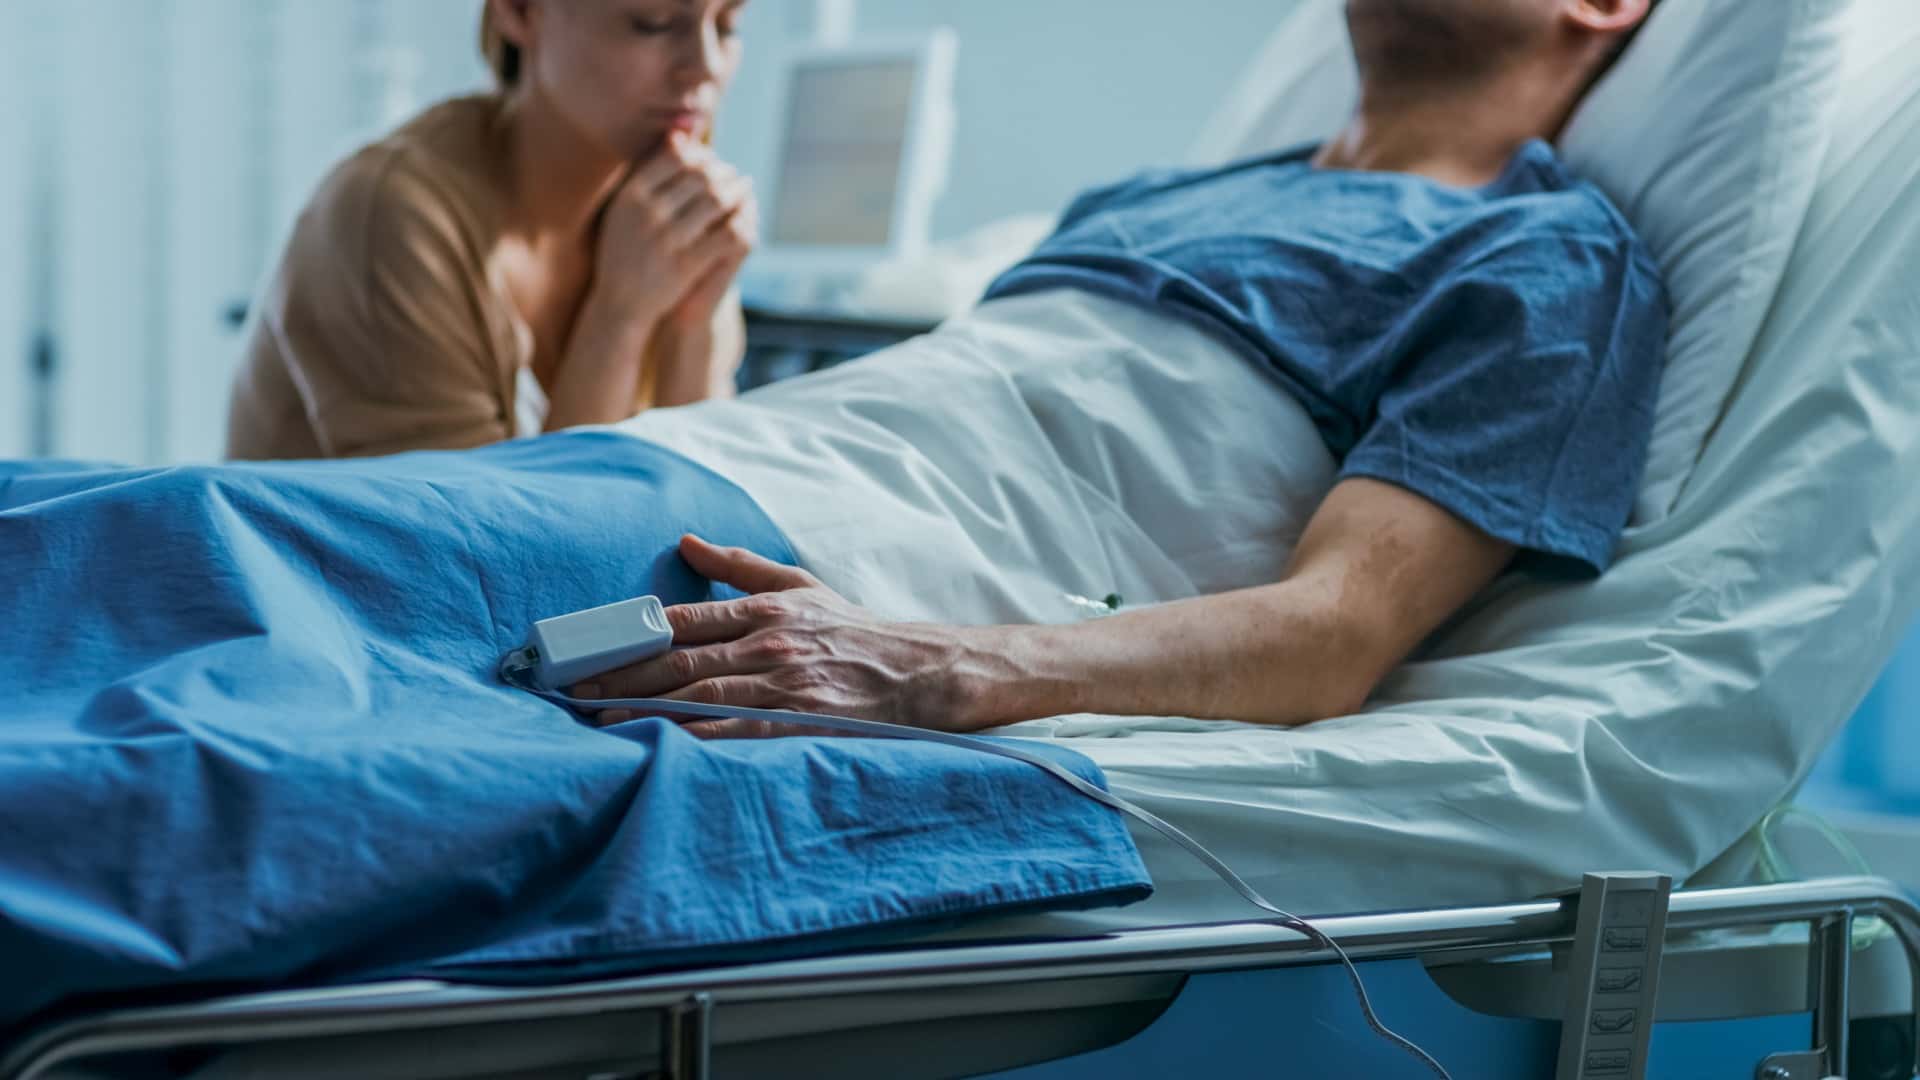 Man Lying on the Hospital Bed With Problematic Wife | Long Term Care Planning​​ | Legacy Law Group